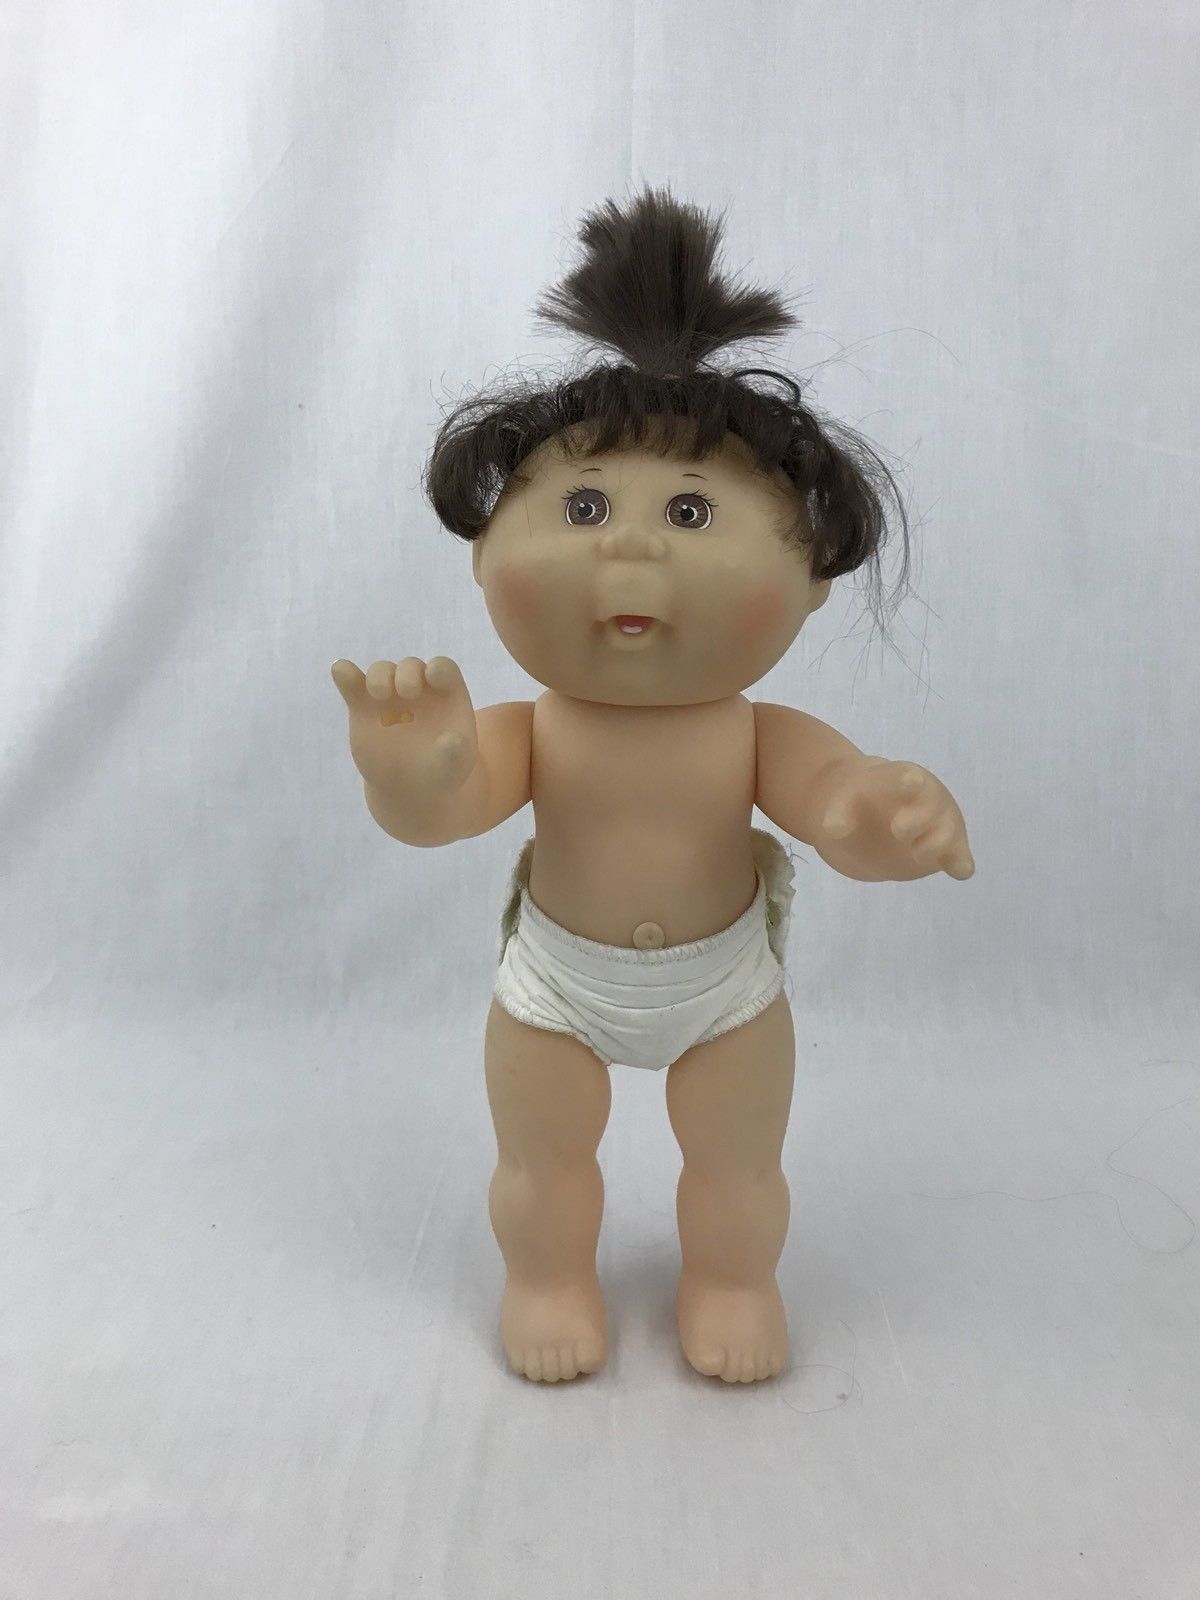 Primary image for Cabbage Patch Doll Mattel 12" Vinyl Body Poseable Arms Legs Brown Eyes Hair 1996